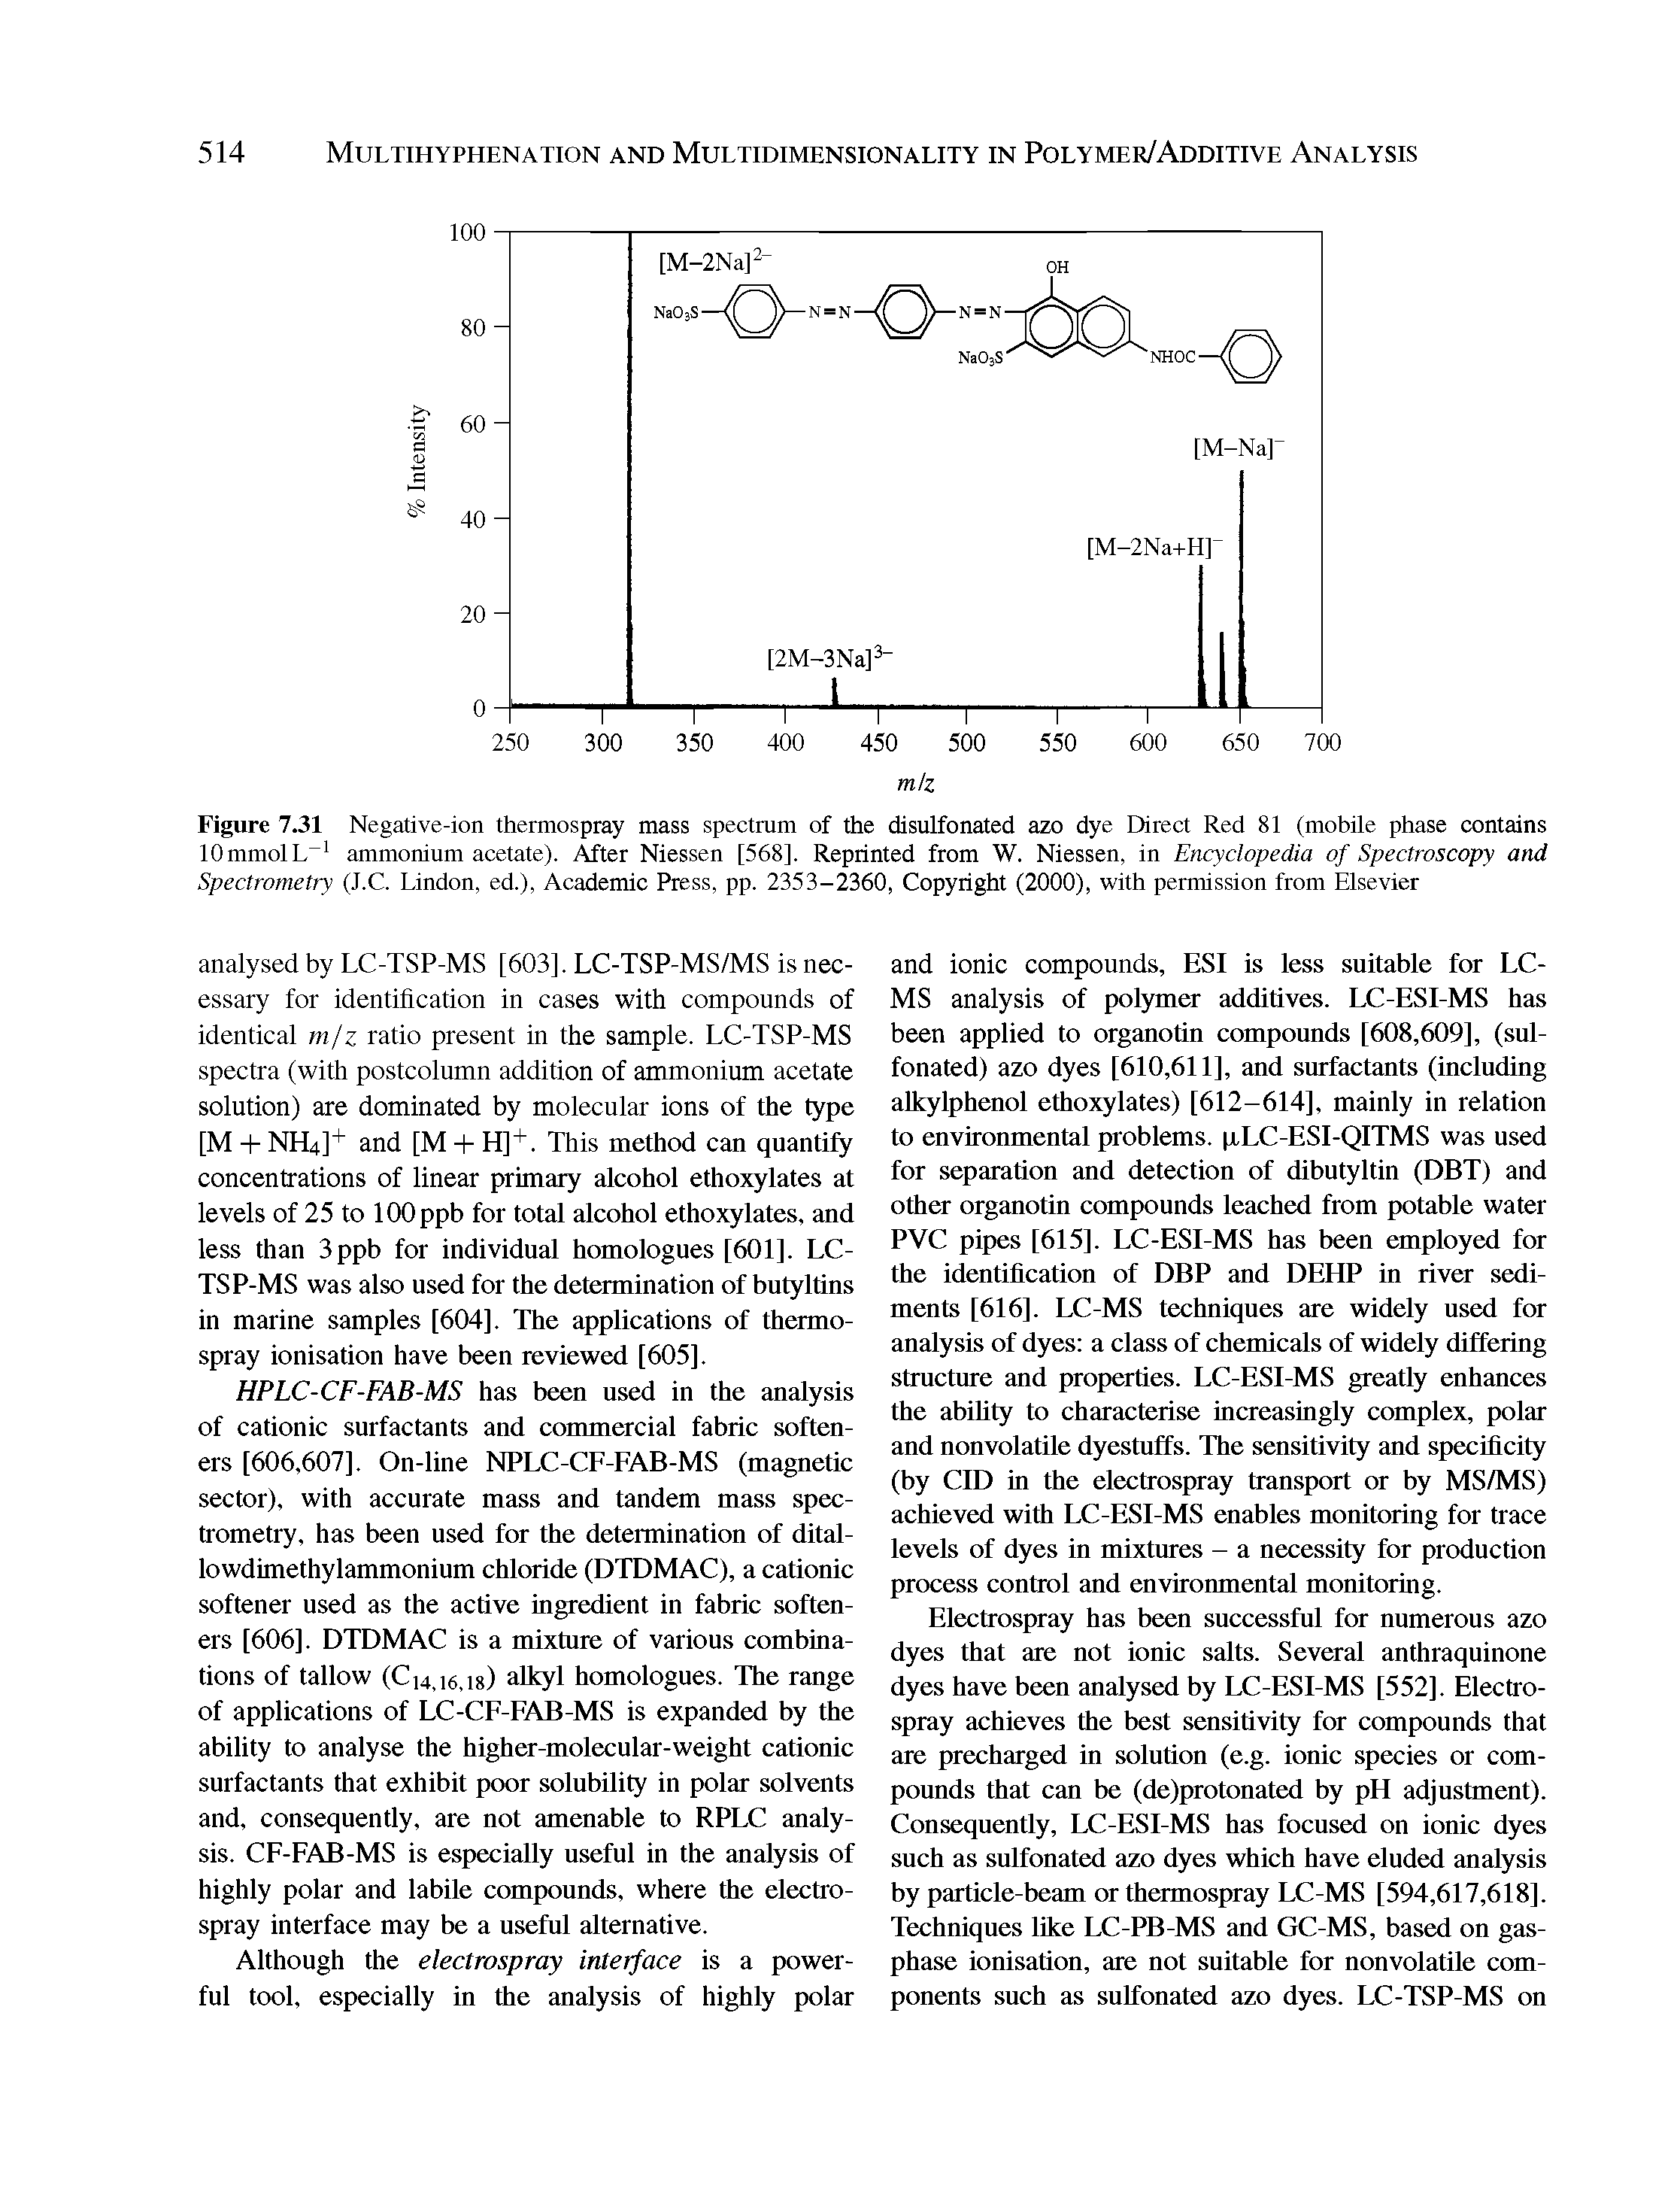 Figure 7.31 Negative-ion thermospray mass spectrum of the disulfonated azo dye Direct Red 81 (mobile phase contains 10mmolL ammonium acetate). After Niessen [568]. Reprinted from W. Niessen, in Encyclopedia of Spectroscopy and Spectrometry (J.C. Lindon, ed.), Academic Press, pp. 2353-2360, Copyright (2000), with permission from Elsevier...